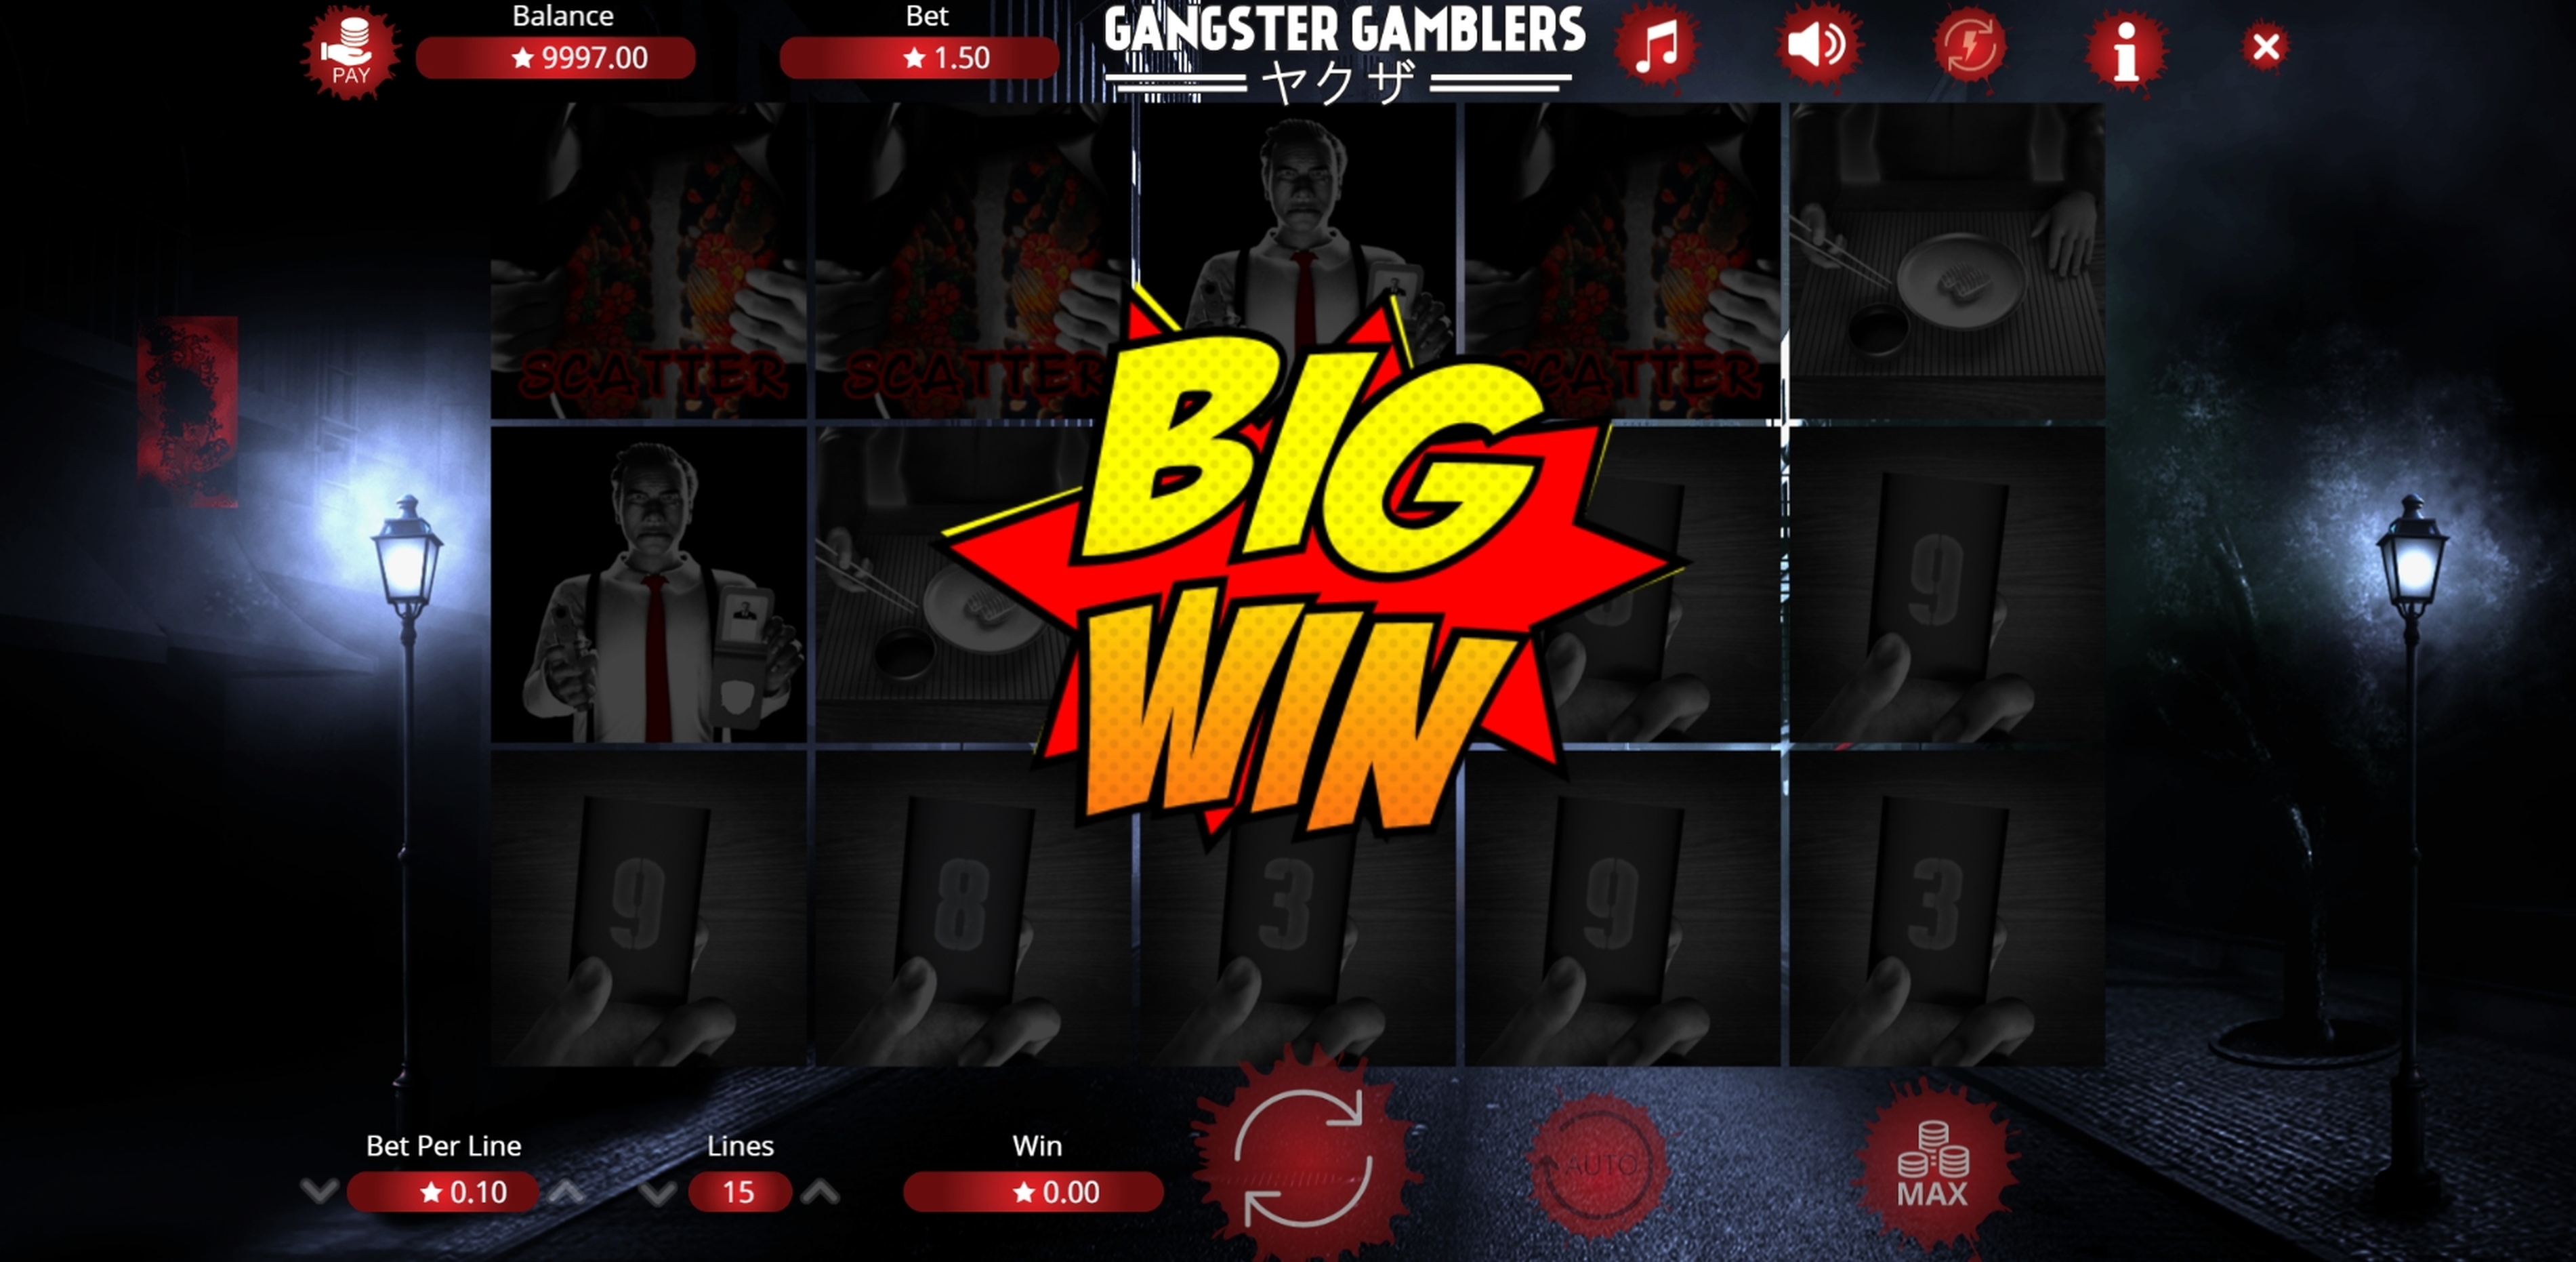 Win Money in Gangster Gamblers Free Slot Game by Booming Games